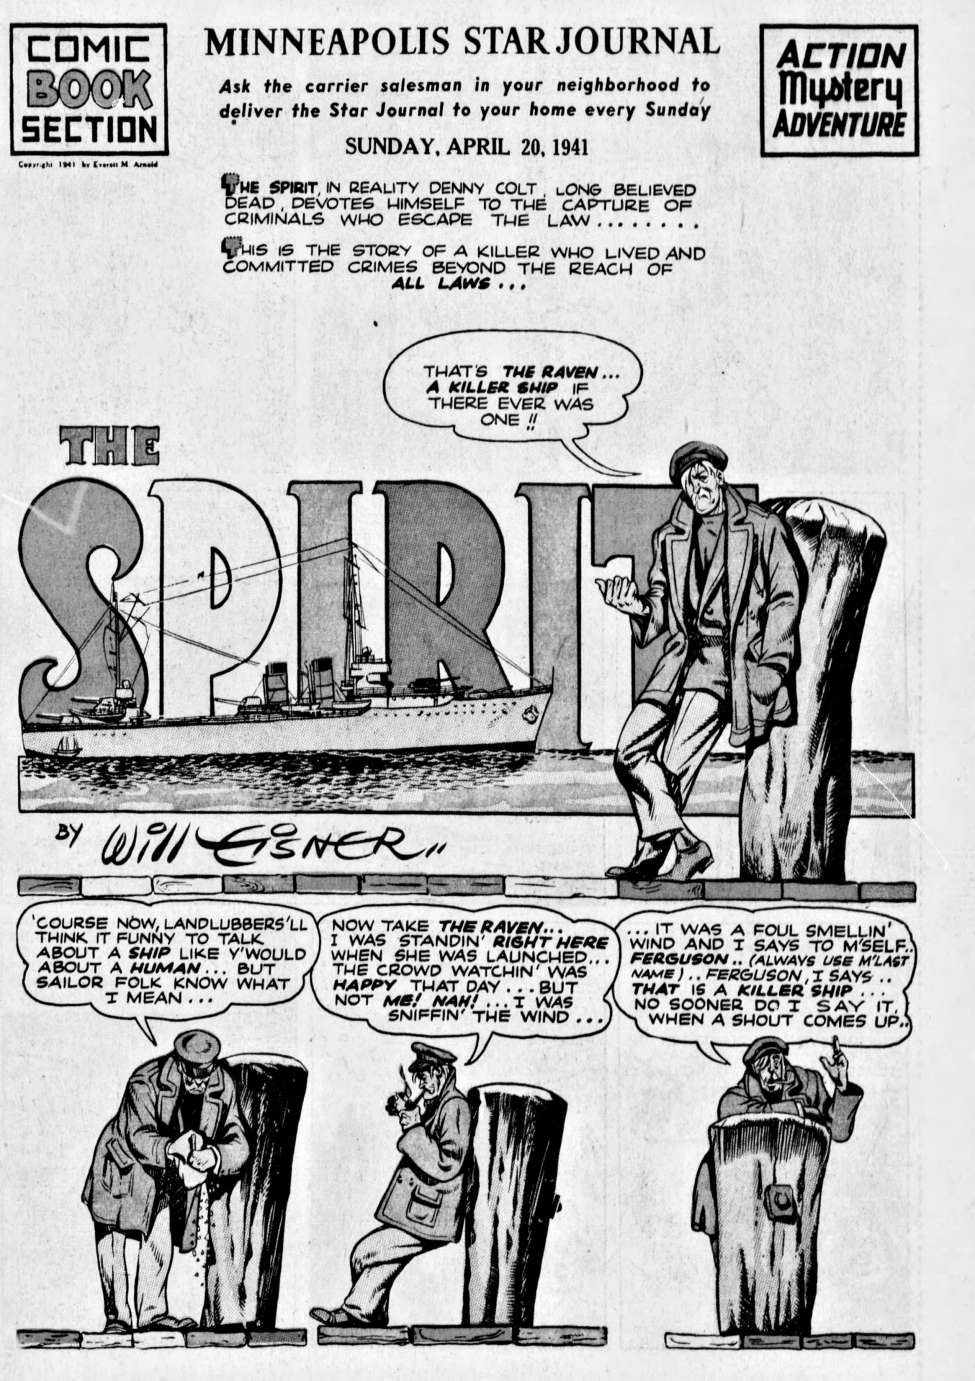 Book Cover For The Spirit (1941-04-20) - Minneapolis Star Journal (b/w)